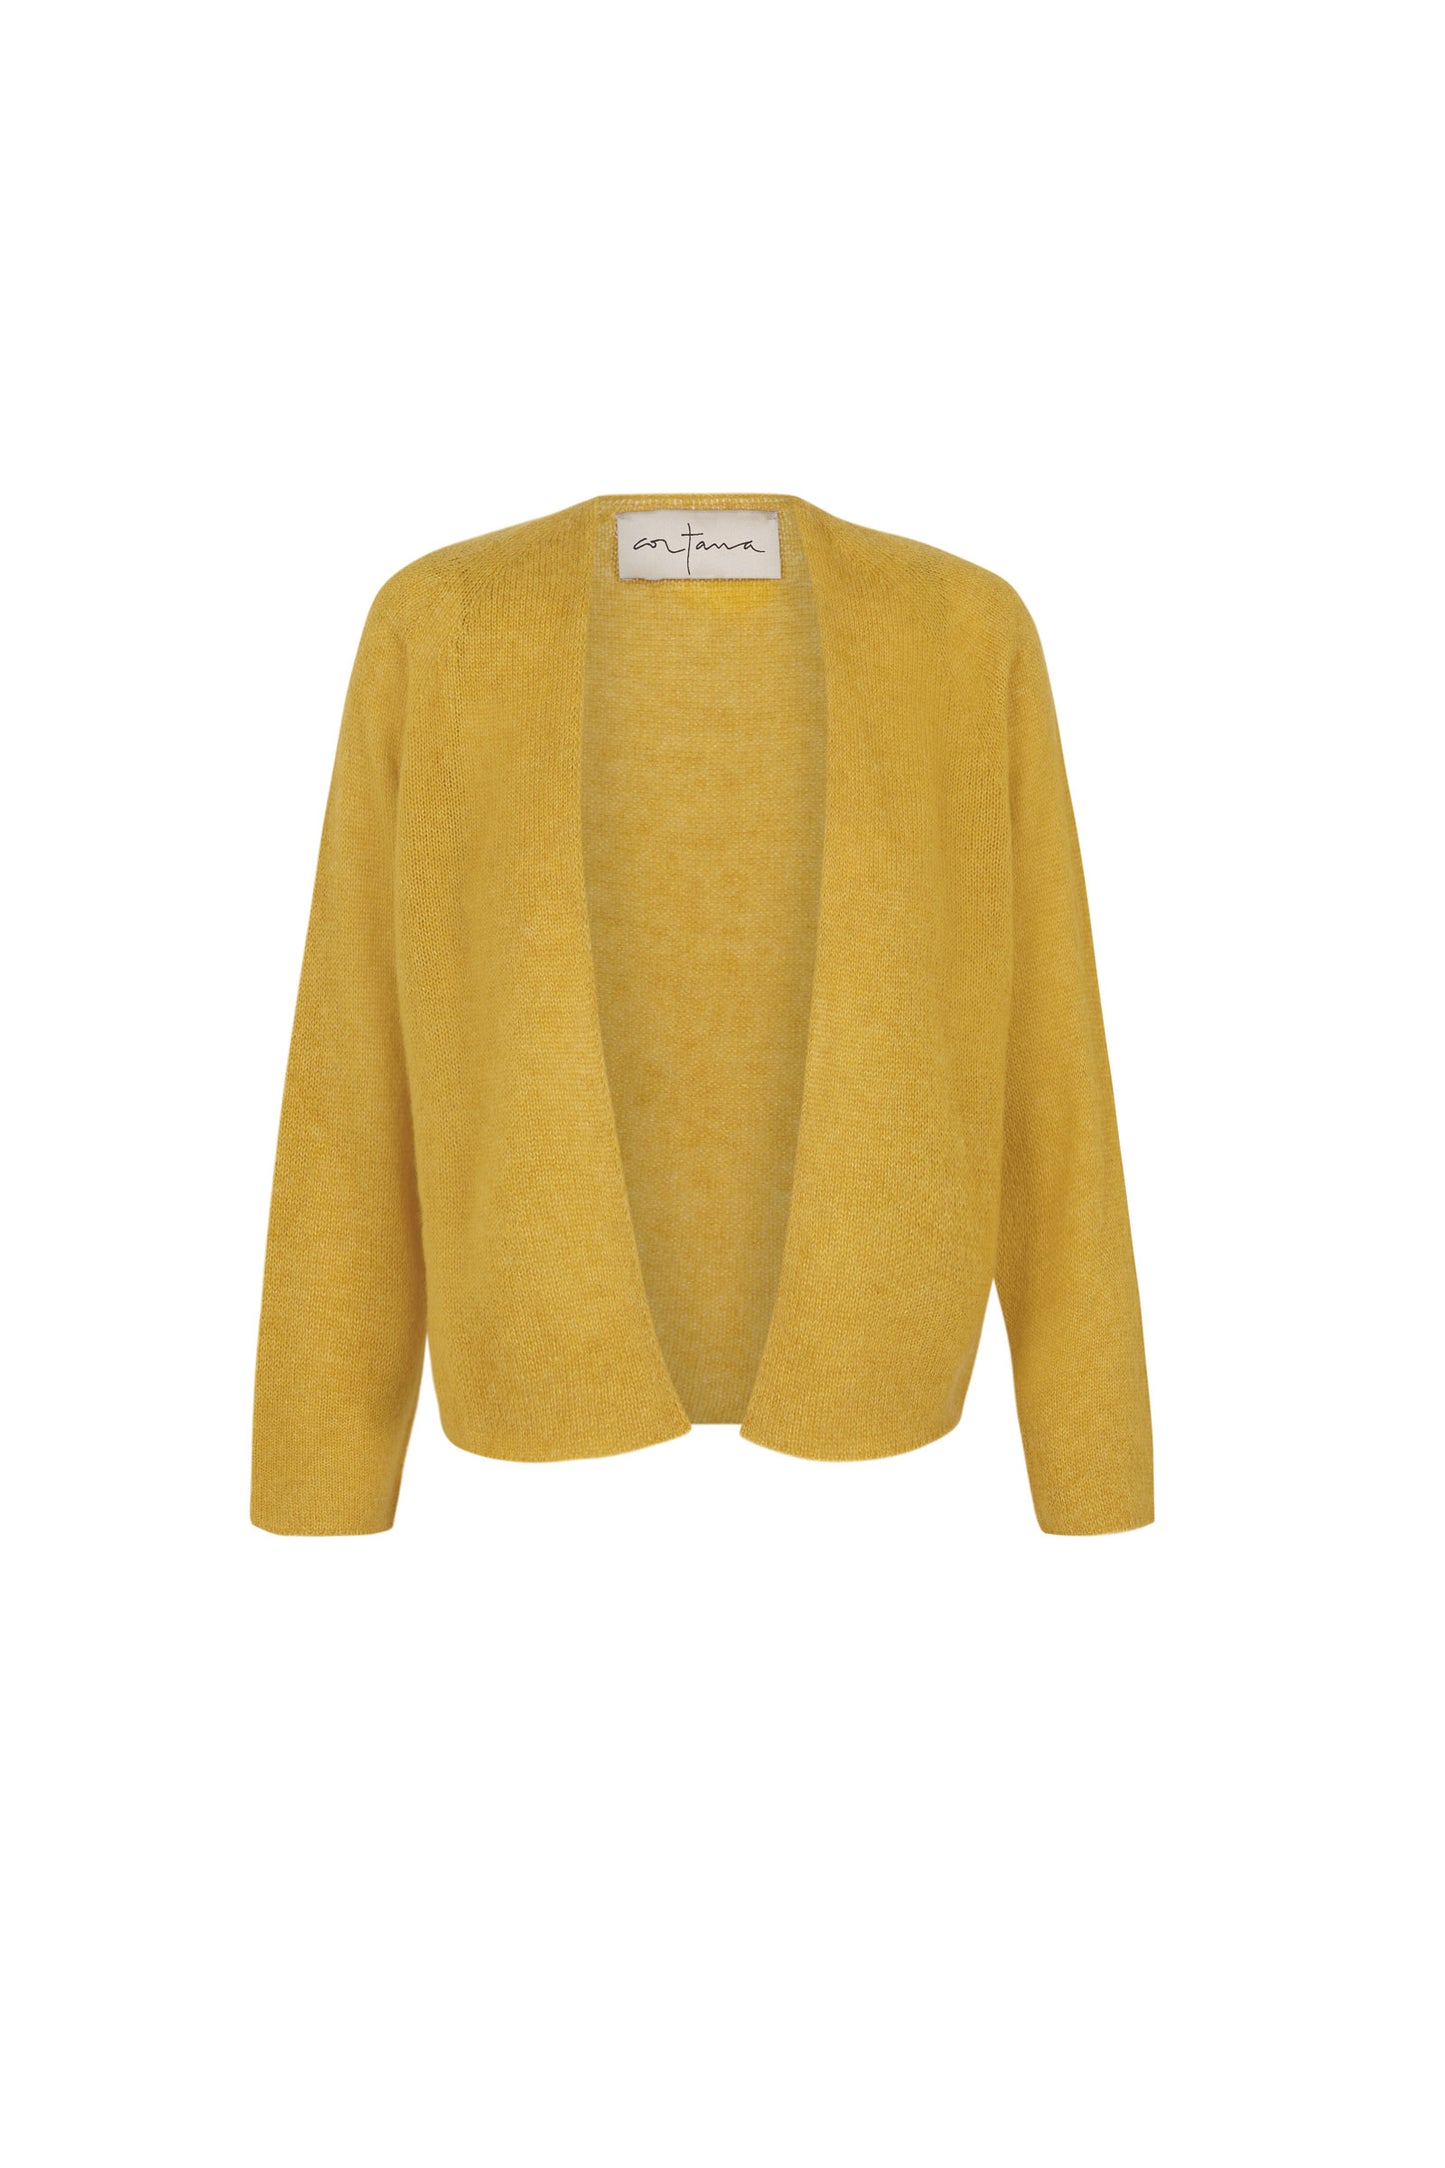 Mar, yellow knitted cardigan in alpaca, cashmere and silk